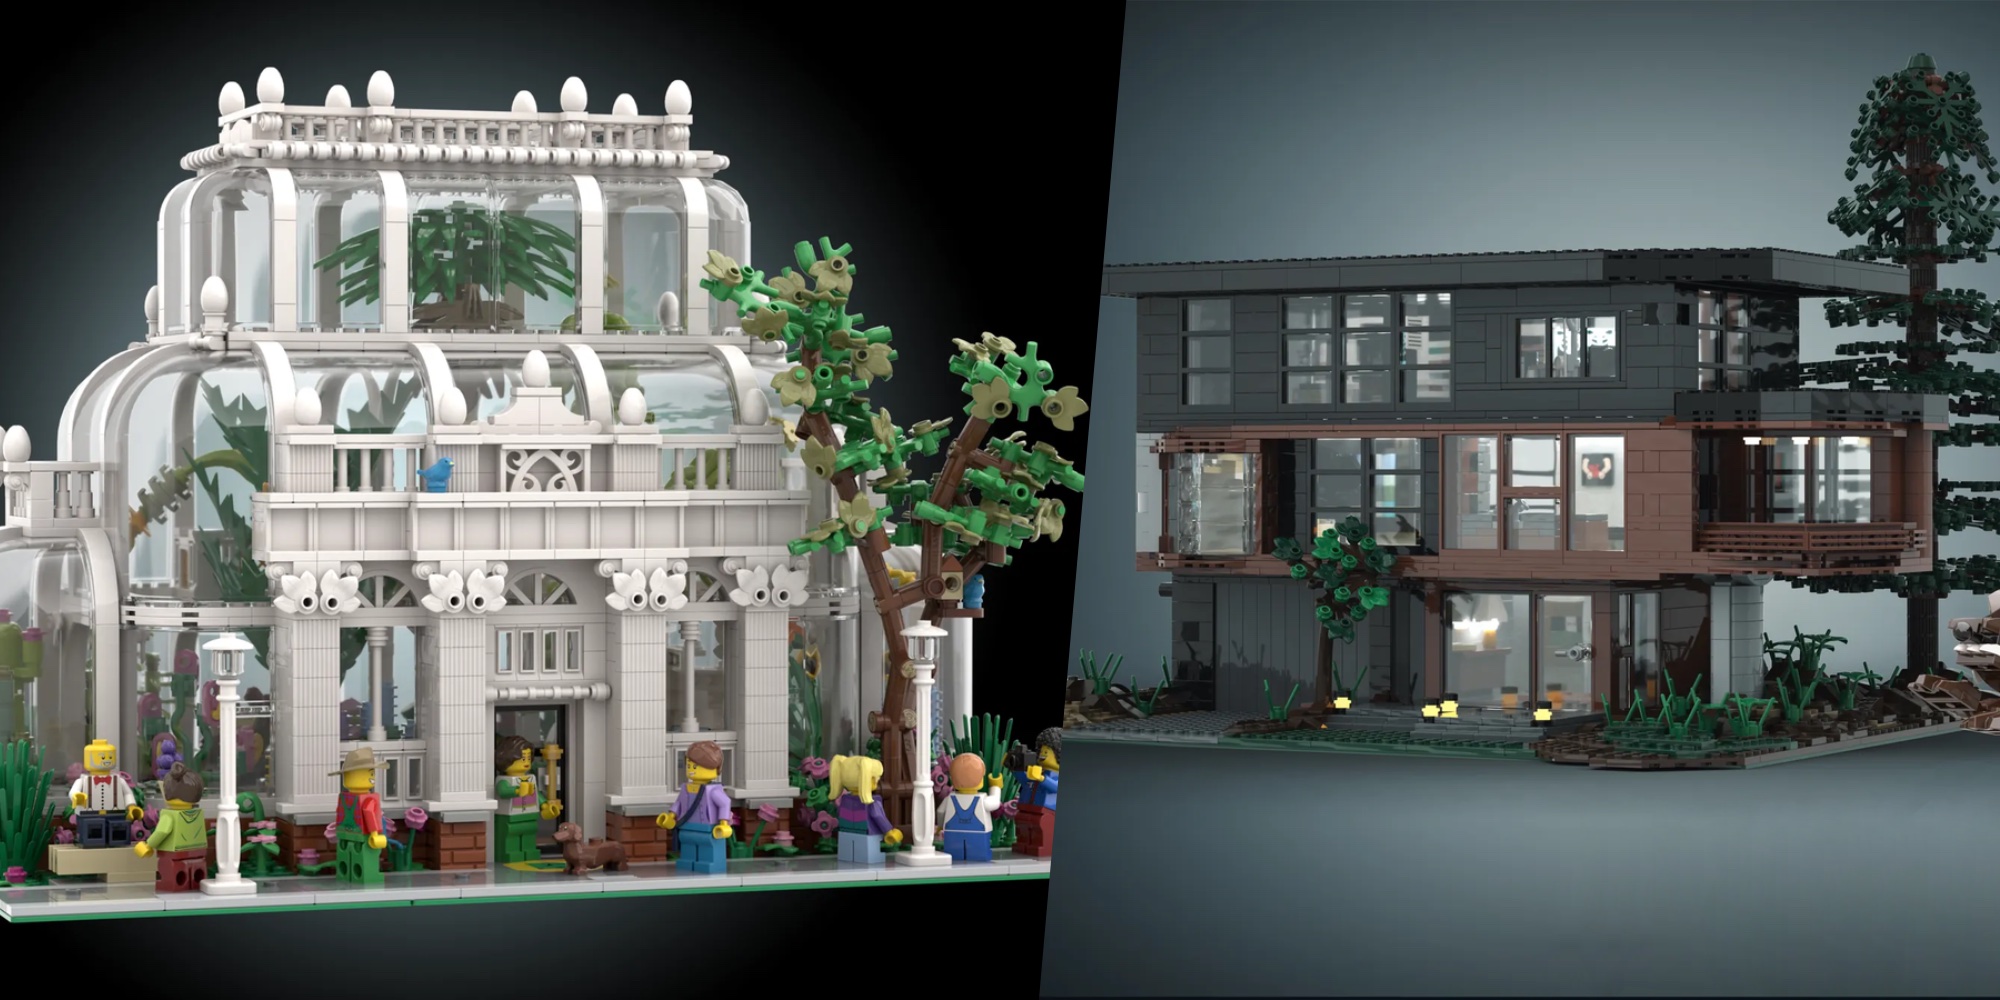 Immerse Yourself in Nature: Creative Botanical Garden Ideas with LEGO